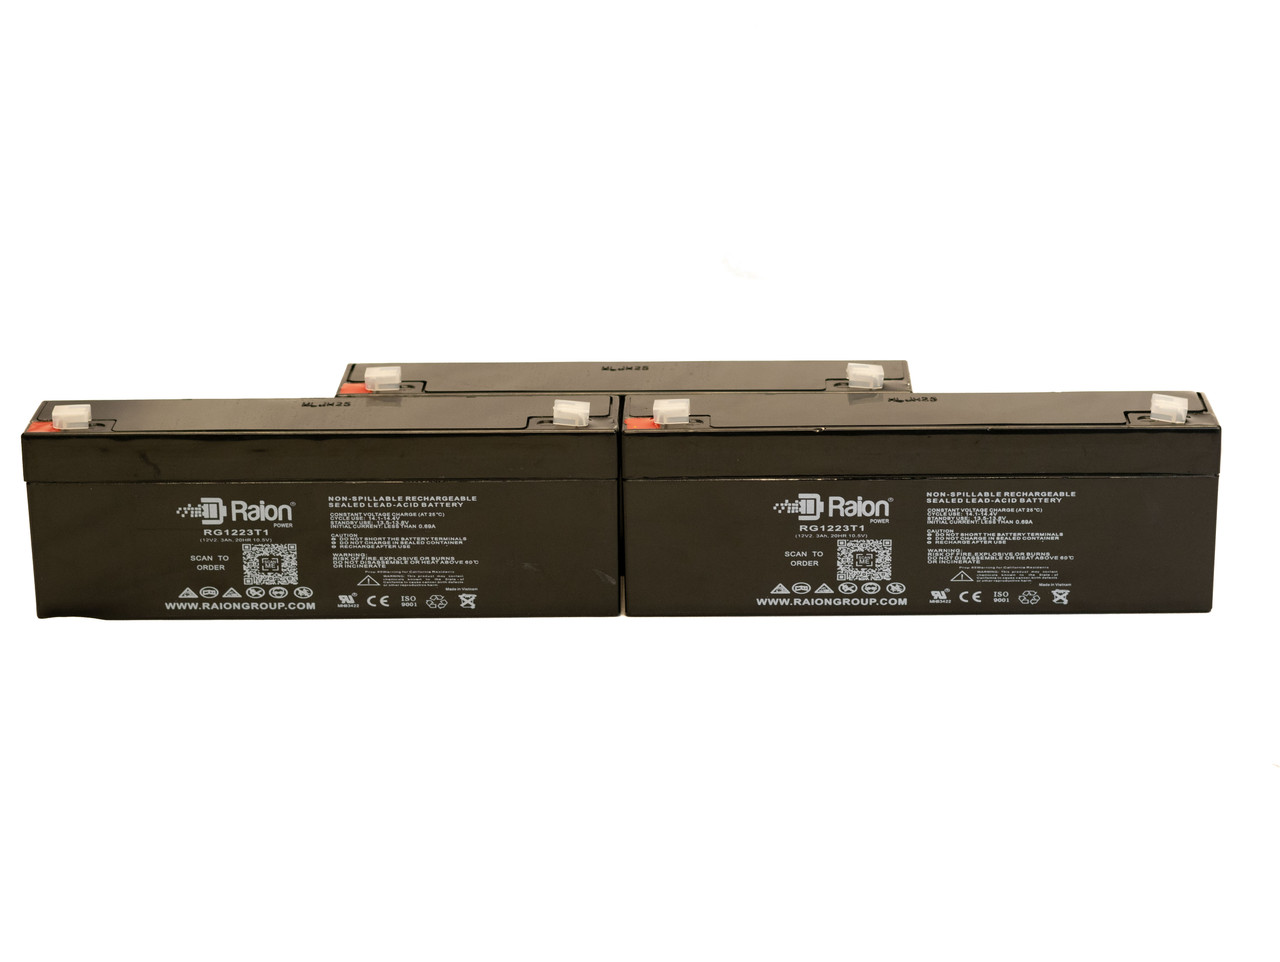 Raion Power 12V 2.3Ah RG1223T1 Replacement Medical Battery for Sscor 2109 - 3 Pack